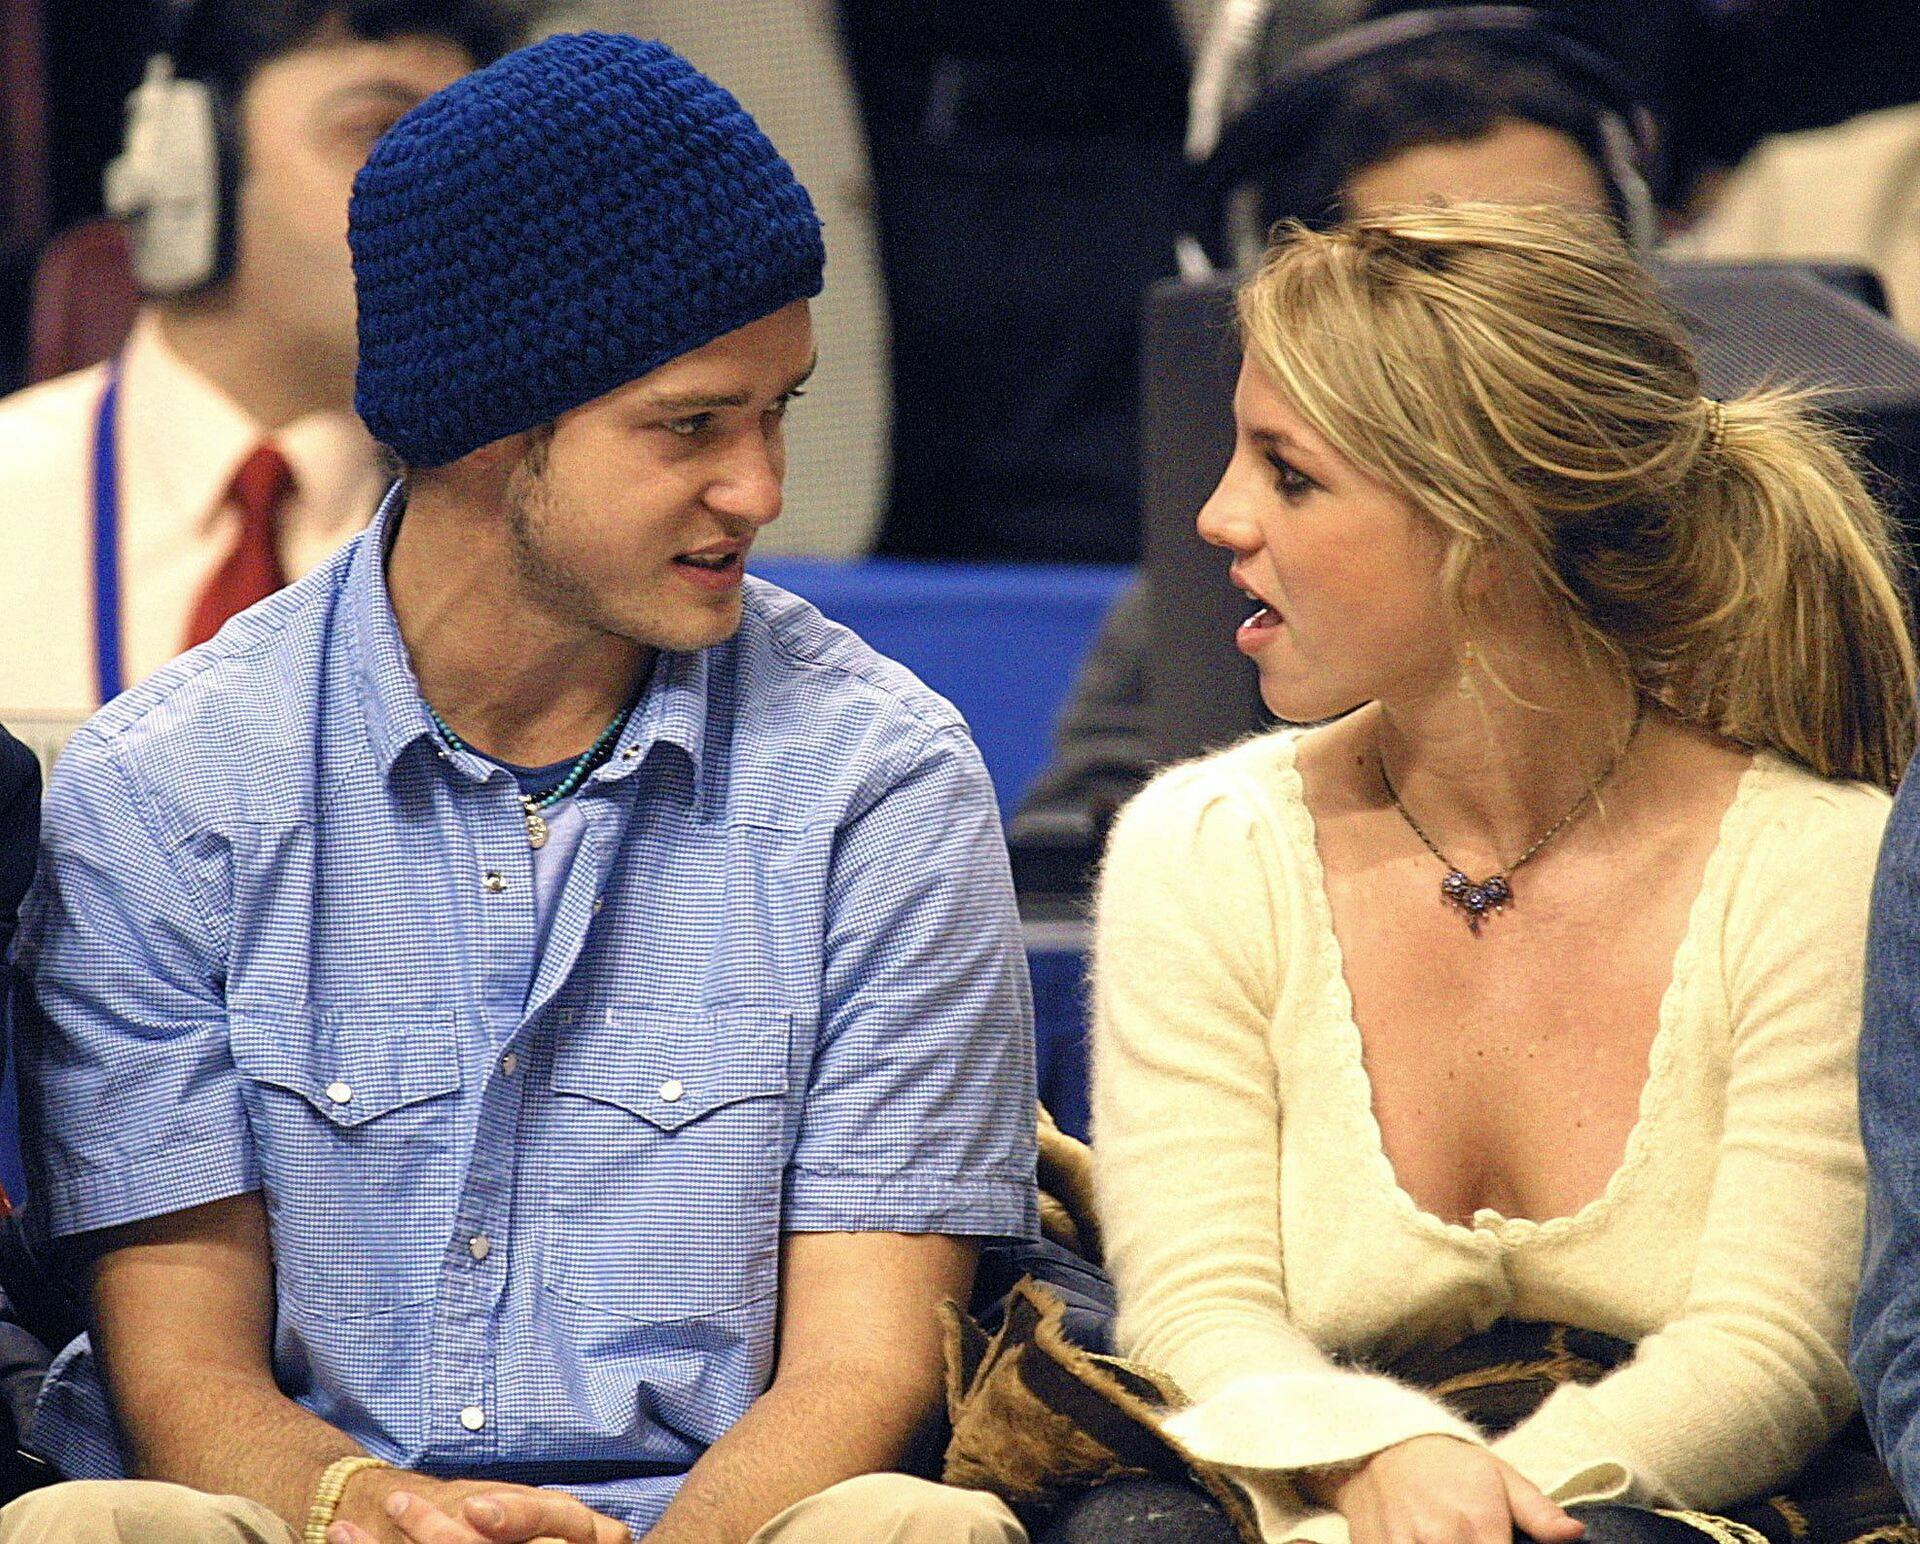 Pop superstars Britney Spears (R) and boyfriend Justin Timberlake (L) talk as they sit courtside at the NBA All-Star Game 10 February 2002 in Philadelphia. AFP Photo / Tom Mihalek